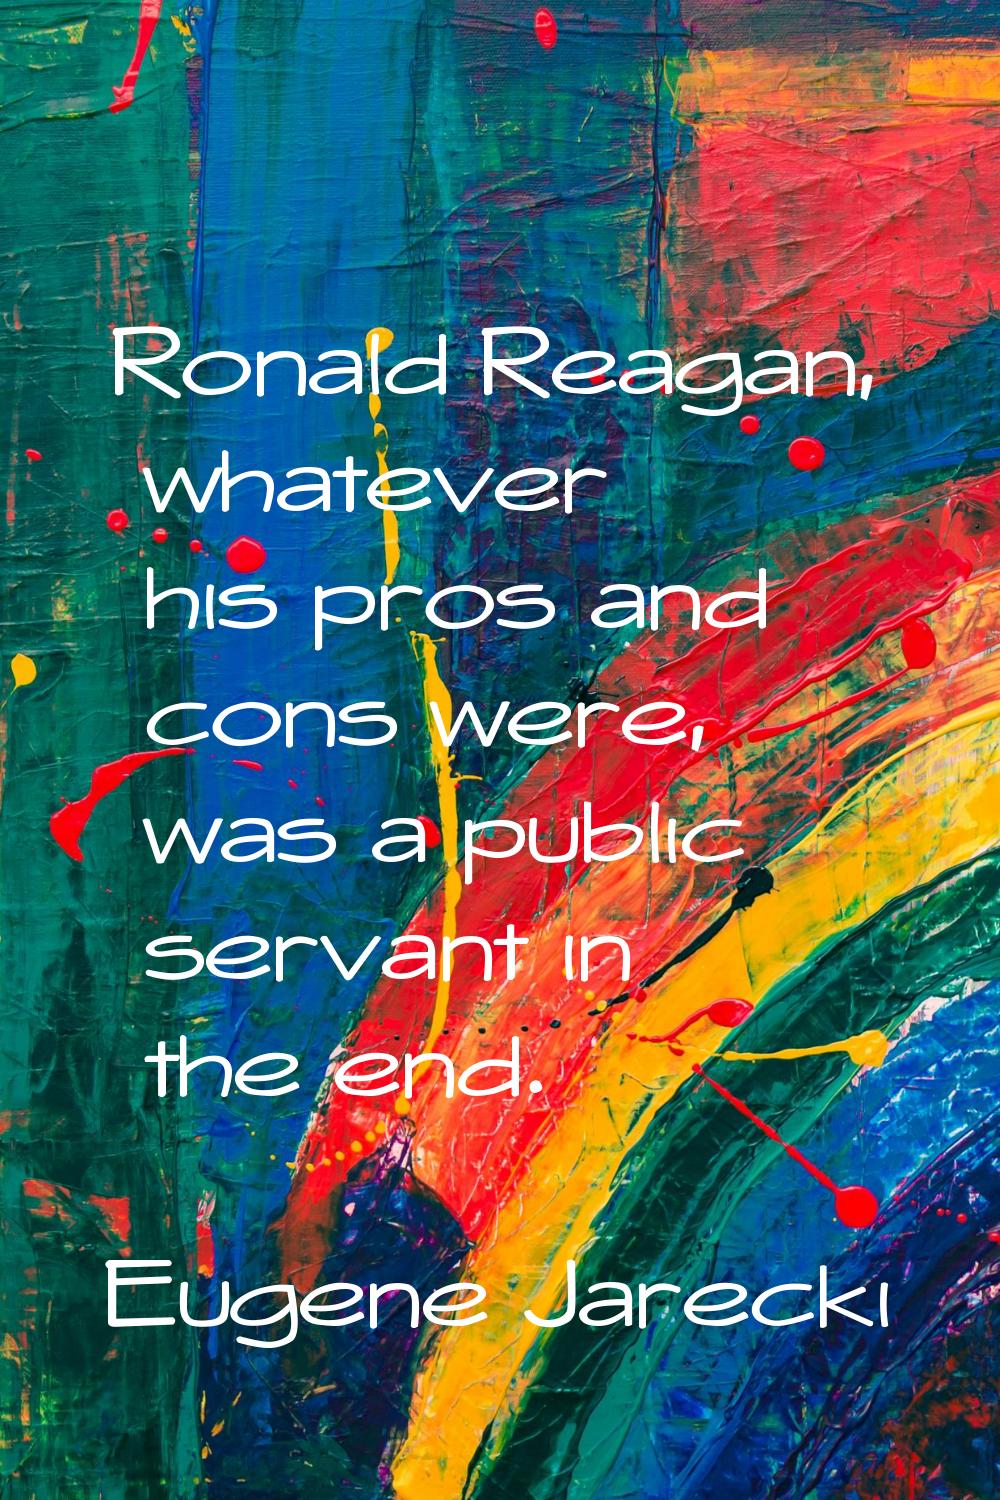 Ronald Reagan, whatever his pros and cons were, was a public servant in the end.